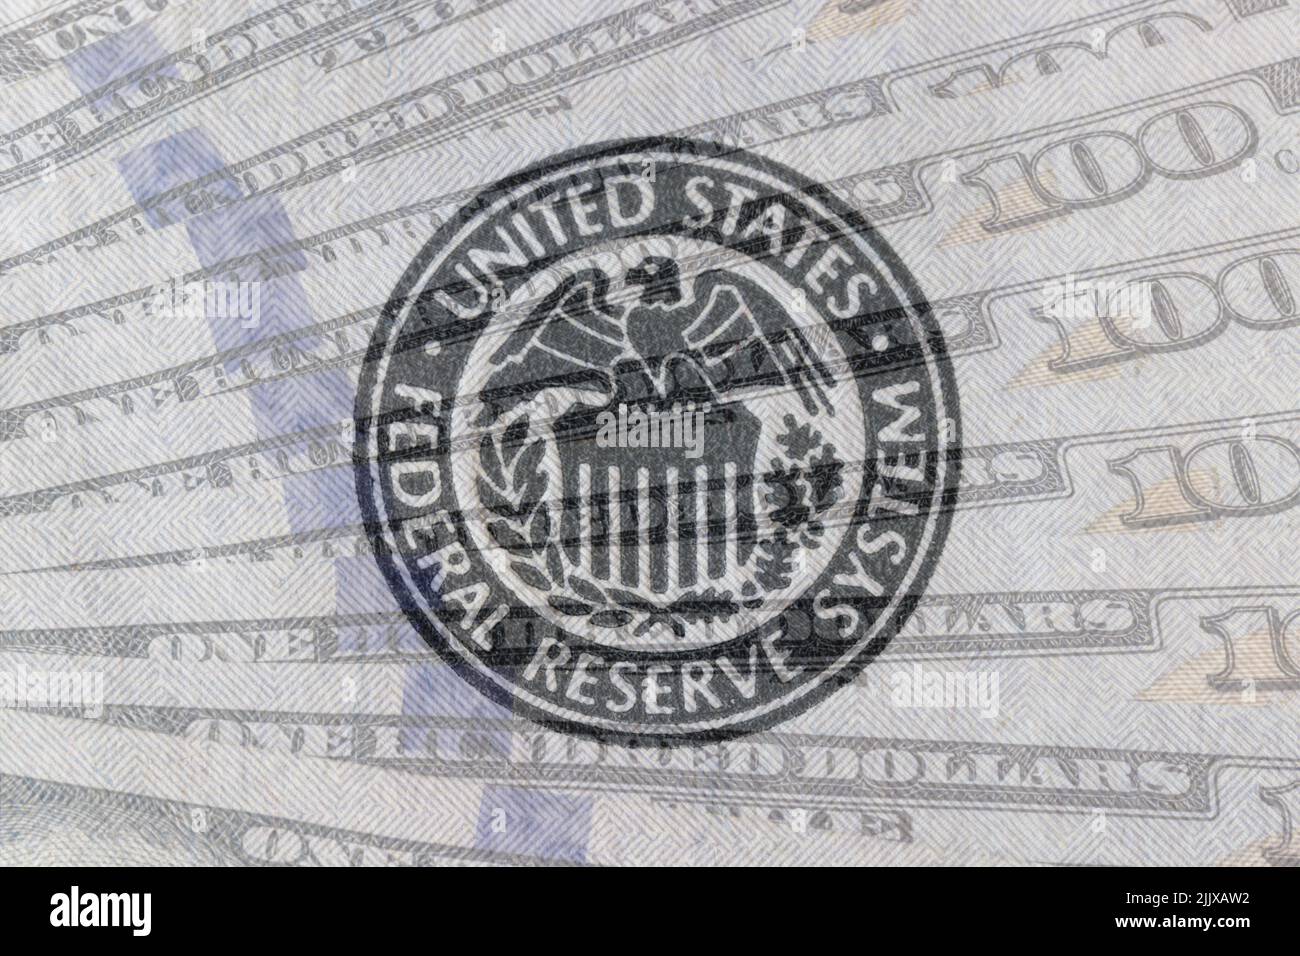 Federal Reserve System seal overlay on a bed of hundred dollar bills. The Fed's responsibilities include setting interest rates and regulating financi Stock Photo